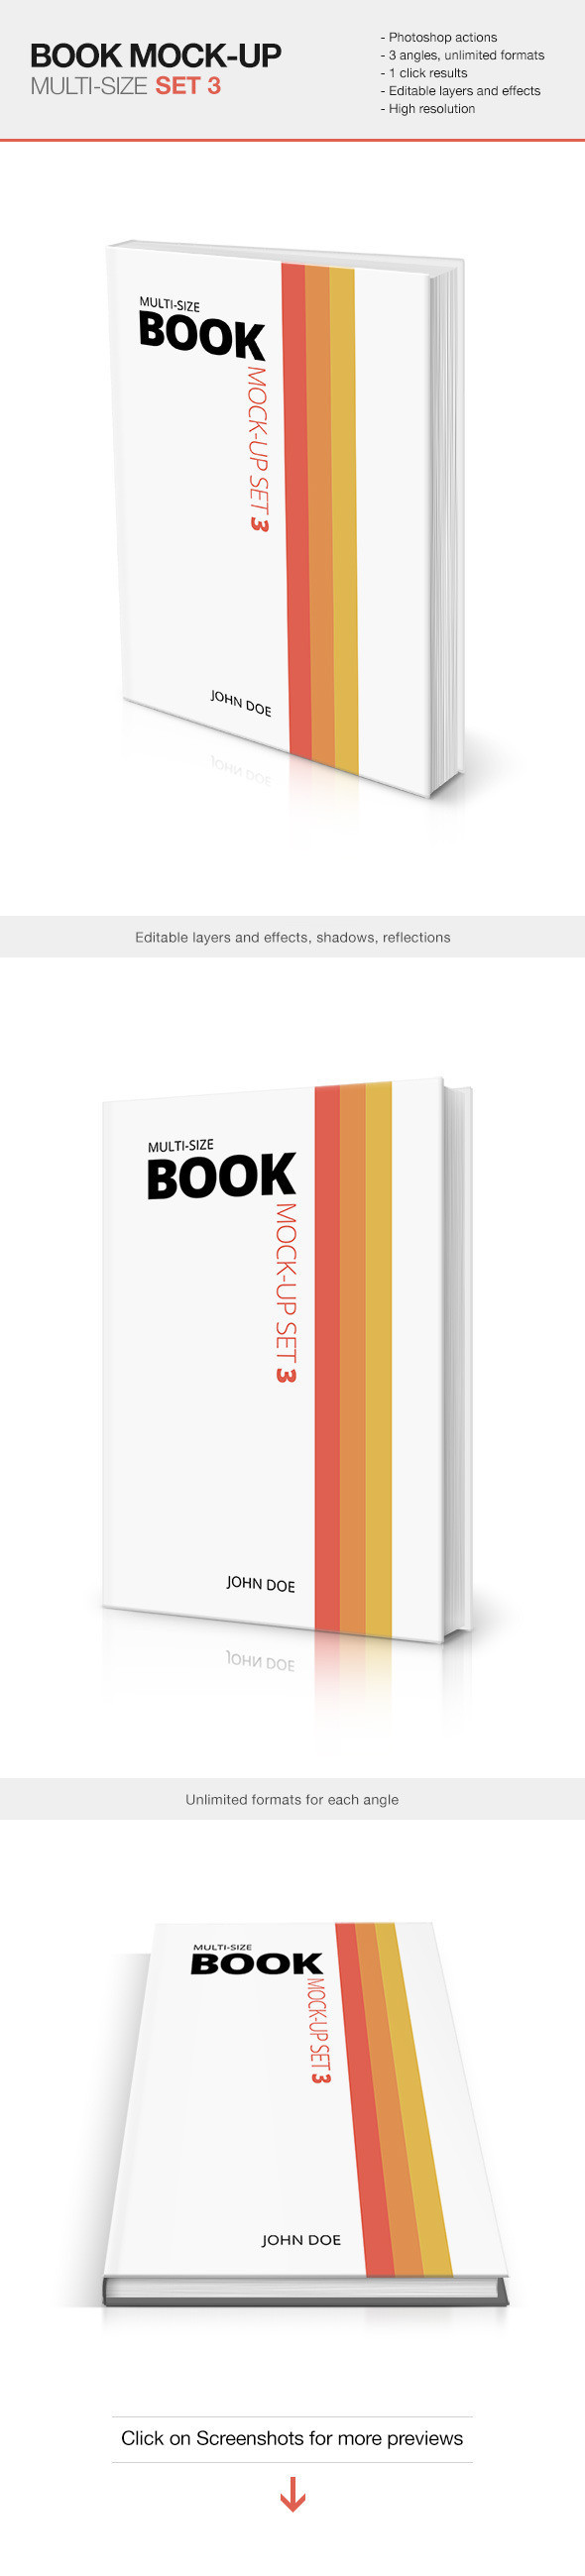 Preview multisize book mockup set3